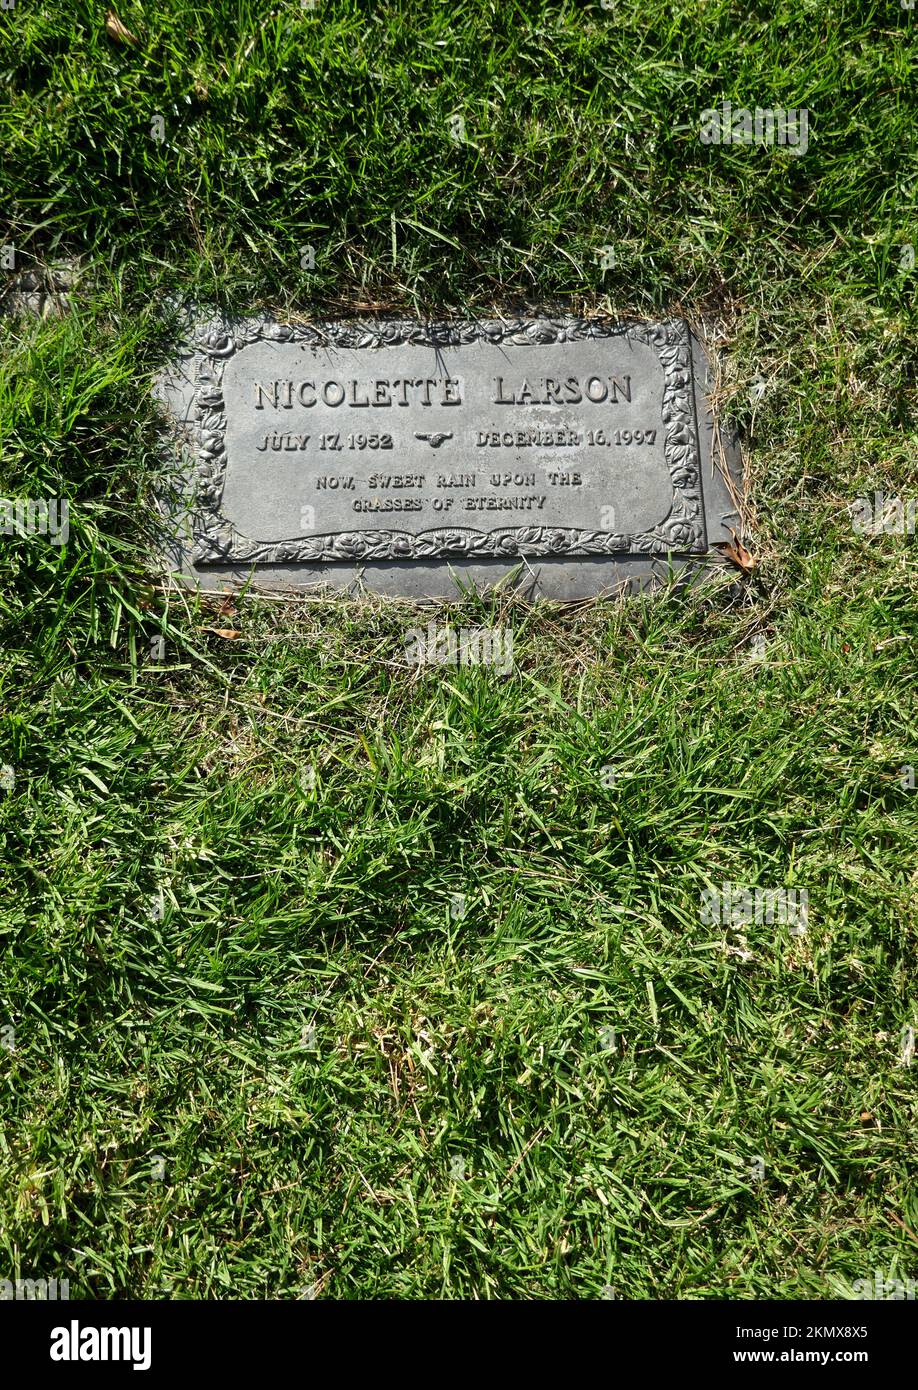 Los Angeles, California, USA 25th November 2022 Singer Nicolette Larson's Grave in Murmuring Trees Section at Forest Lawn Memorial Park Hollywood Hills on November 25, 2022 in Los Angeles, California, USA. Photo by Barry King/Alamy Stock Photo Stock Photo